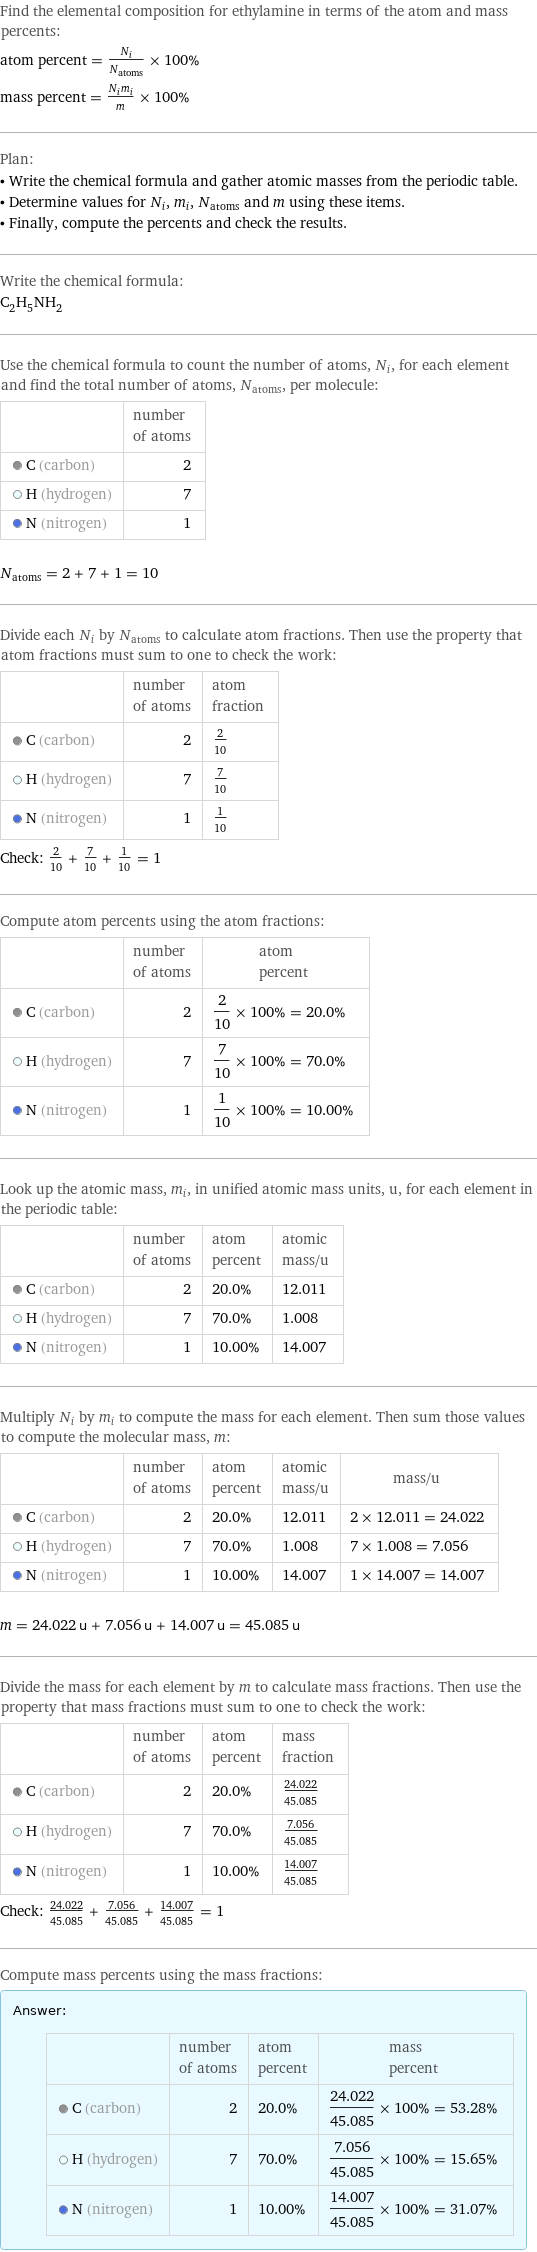 Find the elemental composition for ethylamine in terms of the atom and mass percents: atom percent = N_i/N_atoms × 100% mass percent = (N_im_i)/m × 100% Plan: • Write the chemical formula and gather atomic masses from the periodic table. • Determine values for N_i, m_i, N_atoms and m using these items. • Finally, compute the percents and check the results. Write the chemical formula: C_2H_5NH_2 Use the chemical formula to count the number of atoms, N_i, for each element and find the total number of atoms, N_atoms, per molecule:  | number of atoms  C (carbon) | 2  H (hydrogen) | 7  N (nitrogen) | 1  N_atoms = 2 + 7 + 1 = 10 Divide each N_i by N_atoms to calculate atom fractions. Then use the property that atom fractions must sum to one to check the work:  | number of atoms | atom fraction  C (carbon) | 2 | 2/10  H (hydrogen) | 7 | 7/10  N (nitrogen) | 1 | 1/10 Check: 2/10 + 7/10 + 1/10 = 1 Compute atom percents using the atom fractions:  | number of atoms | atom percent  C (carbon) | 2 | 2/10 × 100% = 20.0%  H (hydrogen) | 7 | 7/10 × 100% = 70.0%  N (nitrogen) | 1 | 1/10 × 100% = 10.00% Look up the atomic mass, m_i, in unified atomic mass units, u, for each element in the periodic table:  | number of atoms | atom percent | atomic mass/u  C (carbon) | 2 | 20.0% | 12.011  H (hydrogen) | 7 | 70.0% | 1.008  N (nitrogen) | 1 | 10.00% | 14.007 Multiply N_i by m_i to compute the mass for each element. Then sum those values to compute the molecular mass, m:  | number of atoms | atom percent | atomic mass/u | mass/u  C (carbon) | 2 | 20.0% | 12.011 | 2 × 12.011 = 24.022  H (hydrogen) | 7 | 70.0% | 1.008 | 7 × 1.008 = 7.056  N (nitrogen) | 1 | 10.00% | 14.007 | 1 × 14.007 = 14.007  m = 24.022 u + 7.056 u + 14.007 u = 45.085 u Divide the mass for each element by m to calculate mass fractions. Then use the property that mass fractions must sum to one to check the work:  | number of atoms | atom percent | mass fraction  C (carbon) | 2 | 20.0% | 24.022/45.085  H (hydrogen) | 7 | 70.0% | 7.056/45.085  N (nitrogen) | 1 | 10.00% | 14.007/45.085 Check: 24.022/45.085 + 7.056/45.085 + 14.007/45.085 = 1 Compute mass percents using the mass fractions: Answer: |   | | number of atoms | atom percent | mass percent  C (carbon) | 2 | 20.0% | 24.022/45.085 × 100% = 53.28%  H (hydrogen) | 7 | 70.0% | 7.056/45.085 × 100% = 15.65%  N (nitrogen) | 1 | 10.00% | 14.007/45.085 × 100% = 31.07%